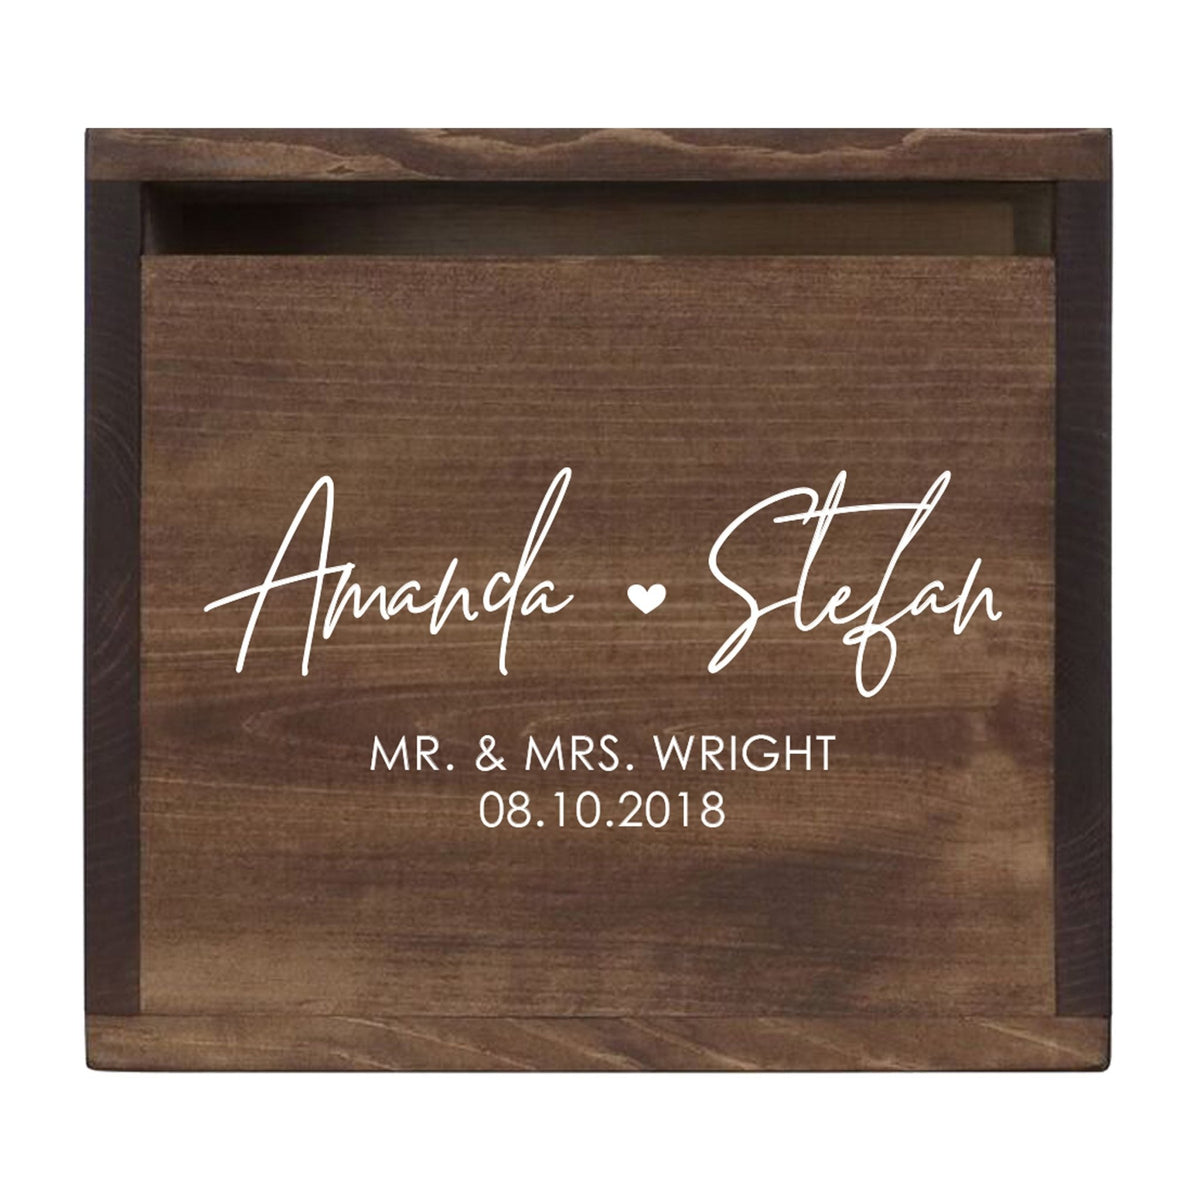 Personalized Wooden Card Box for Wedding Ceremonies, Venues, Receptions, Bridal Showers, and Engagement Parties 13.5x12 - Amanda &amp; Stefan (Heart) - LifeSong Milestones